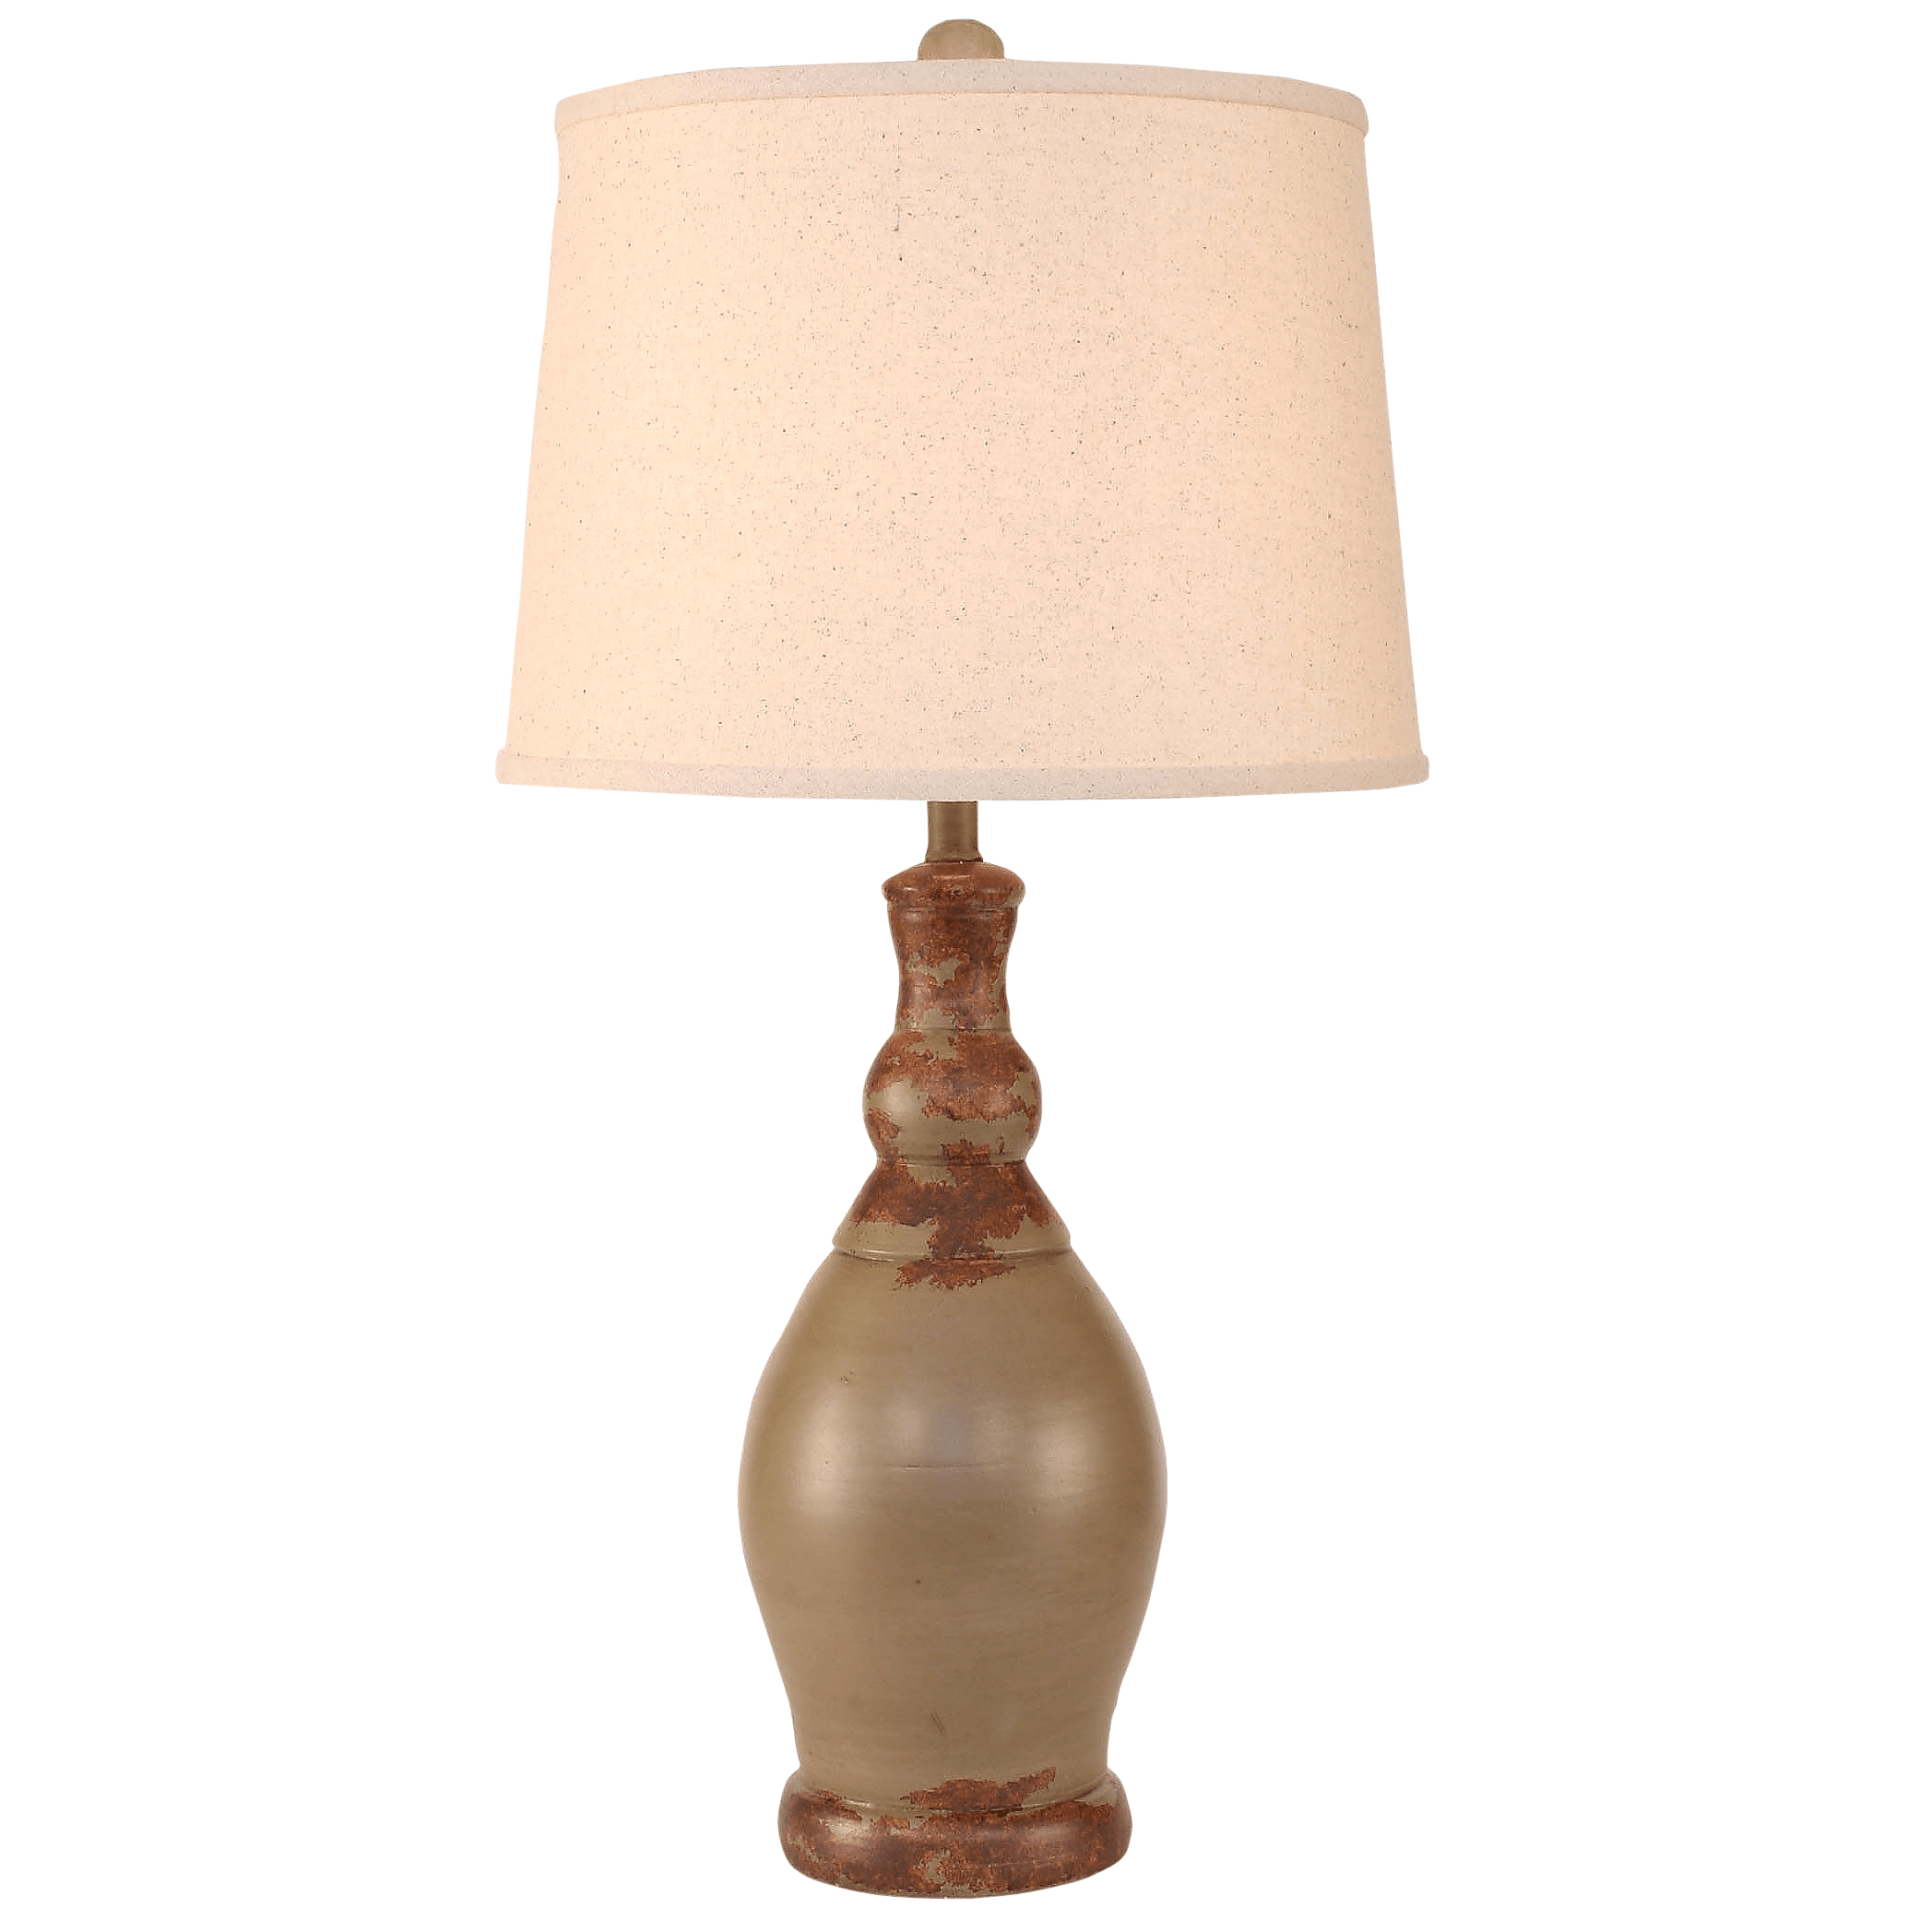 Slender-Neck Casual Table Lamp